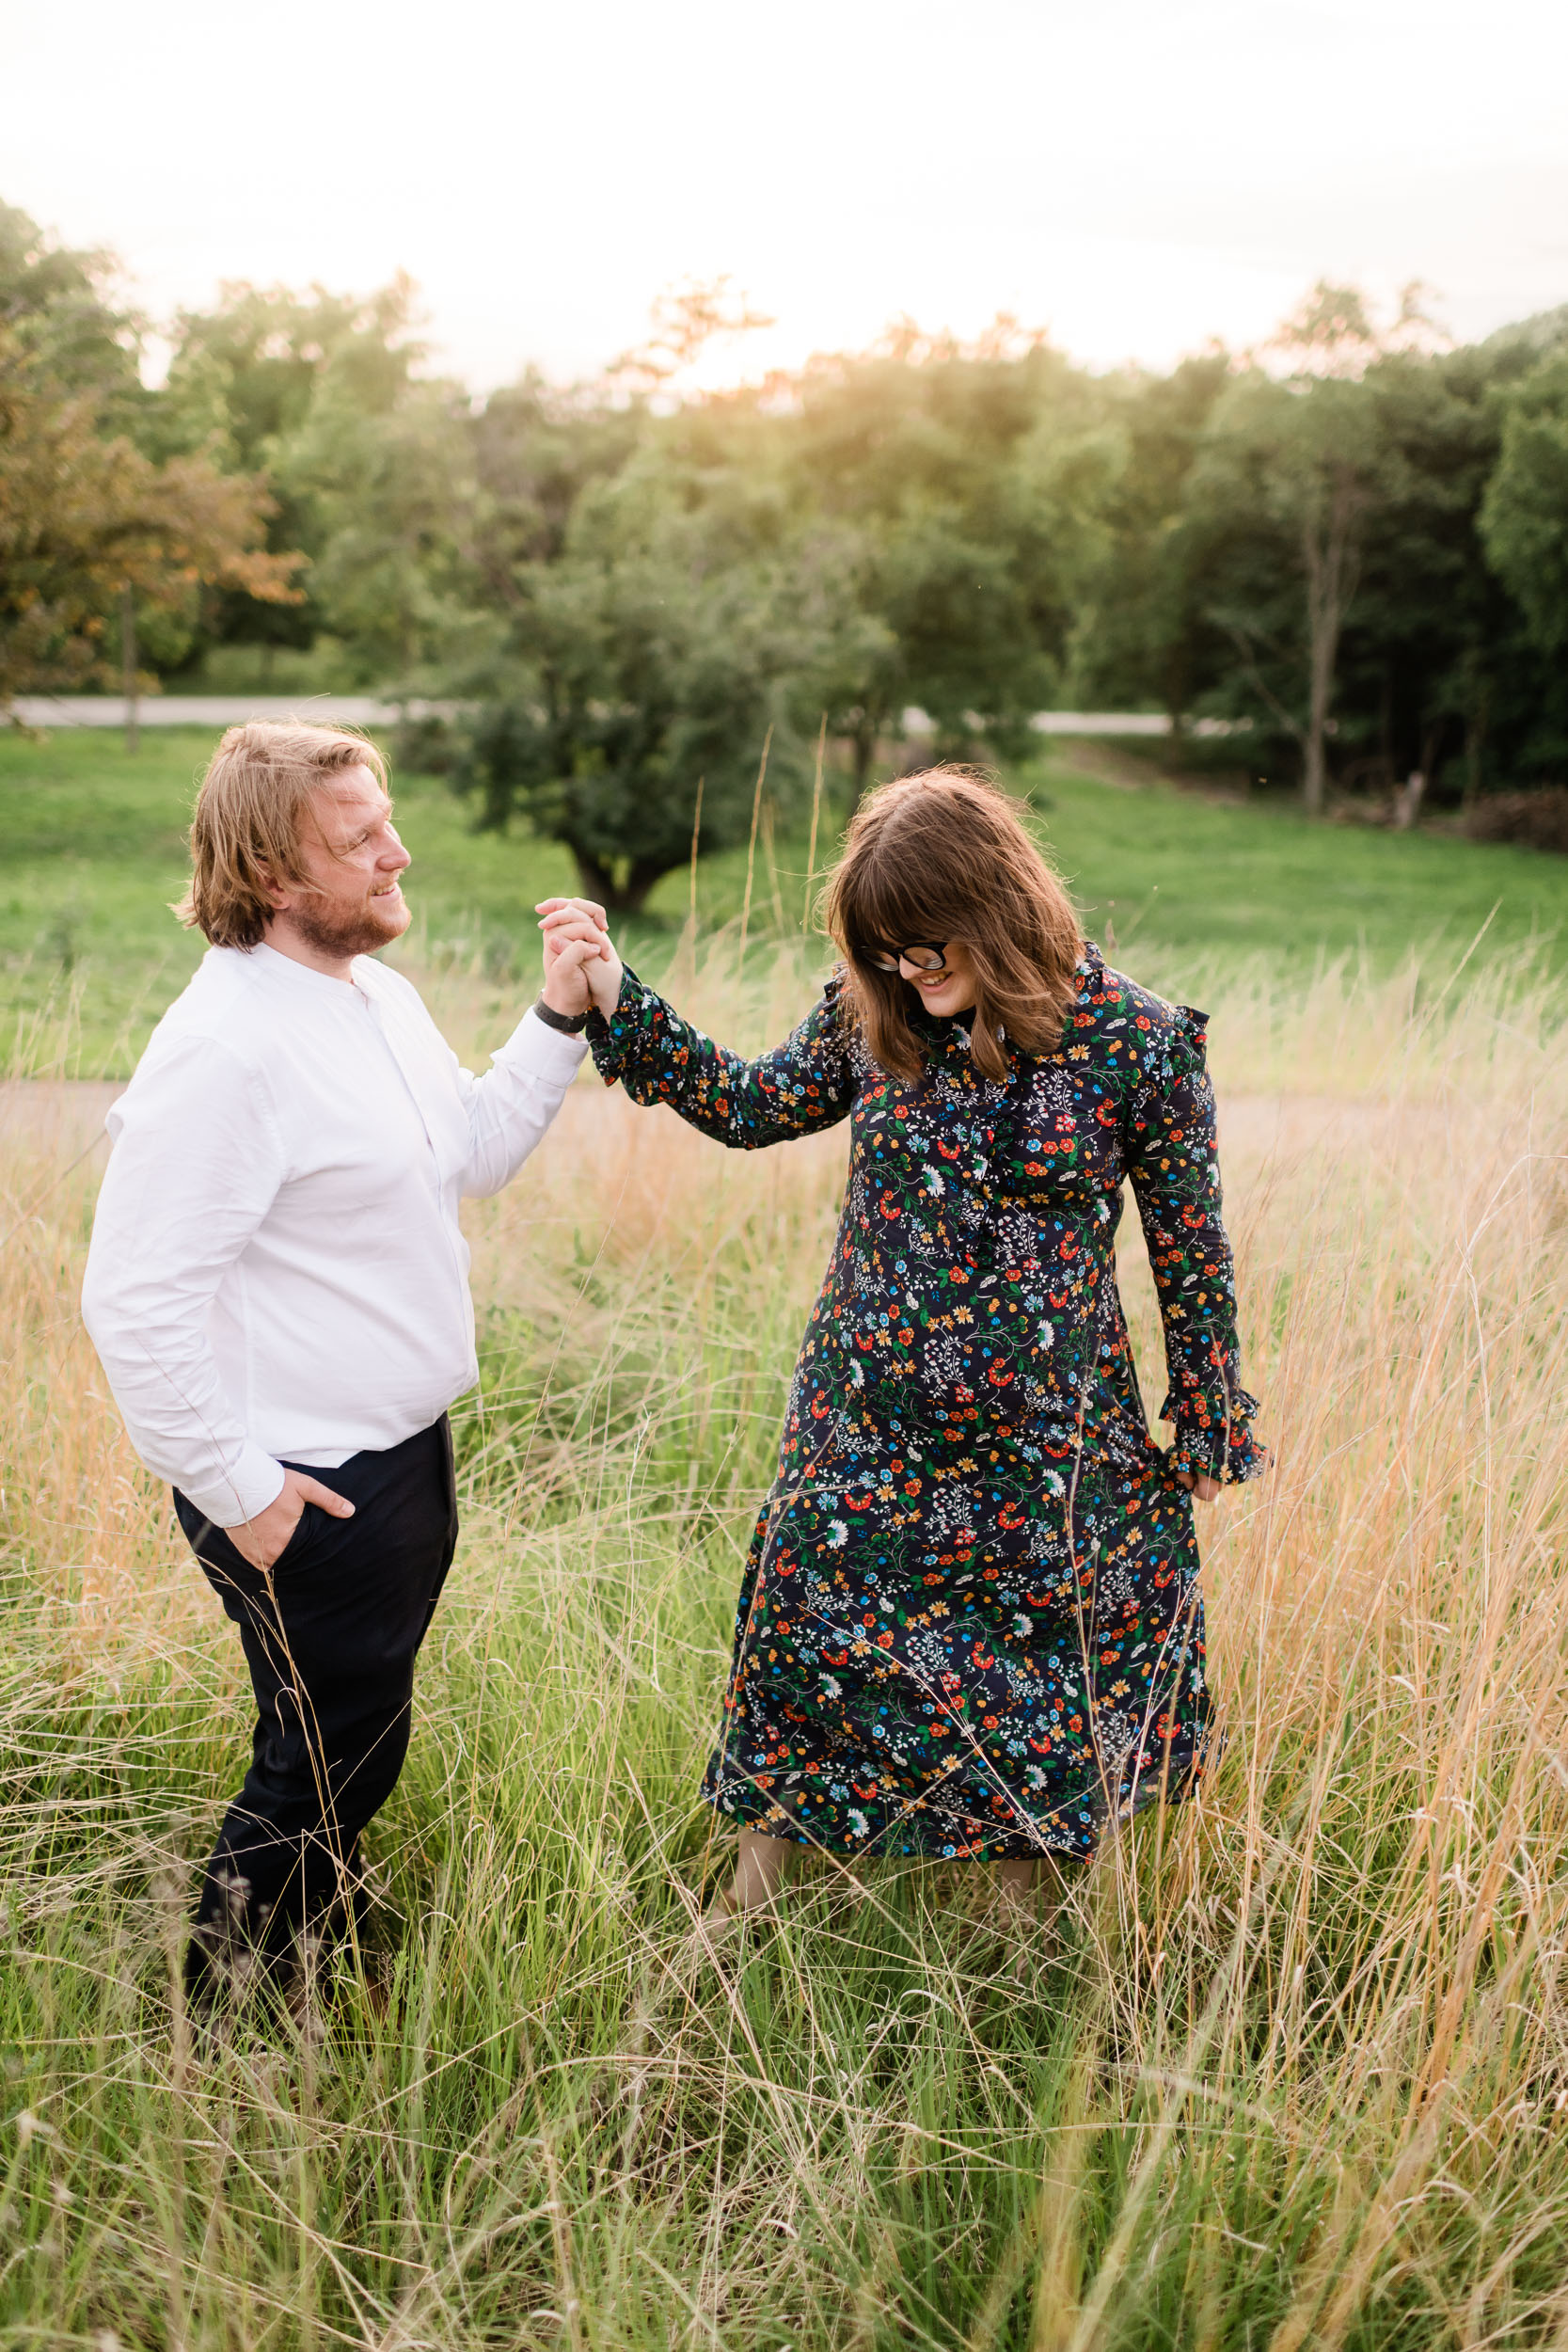 Engaged couple twirling in a field